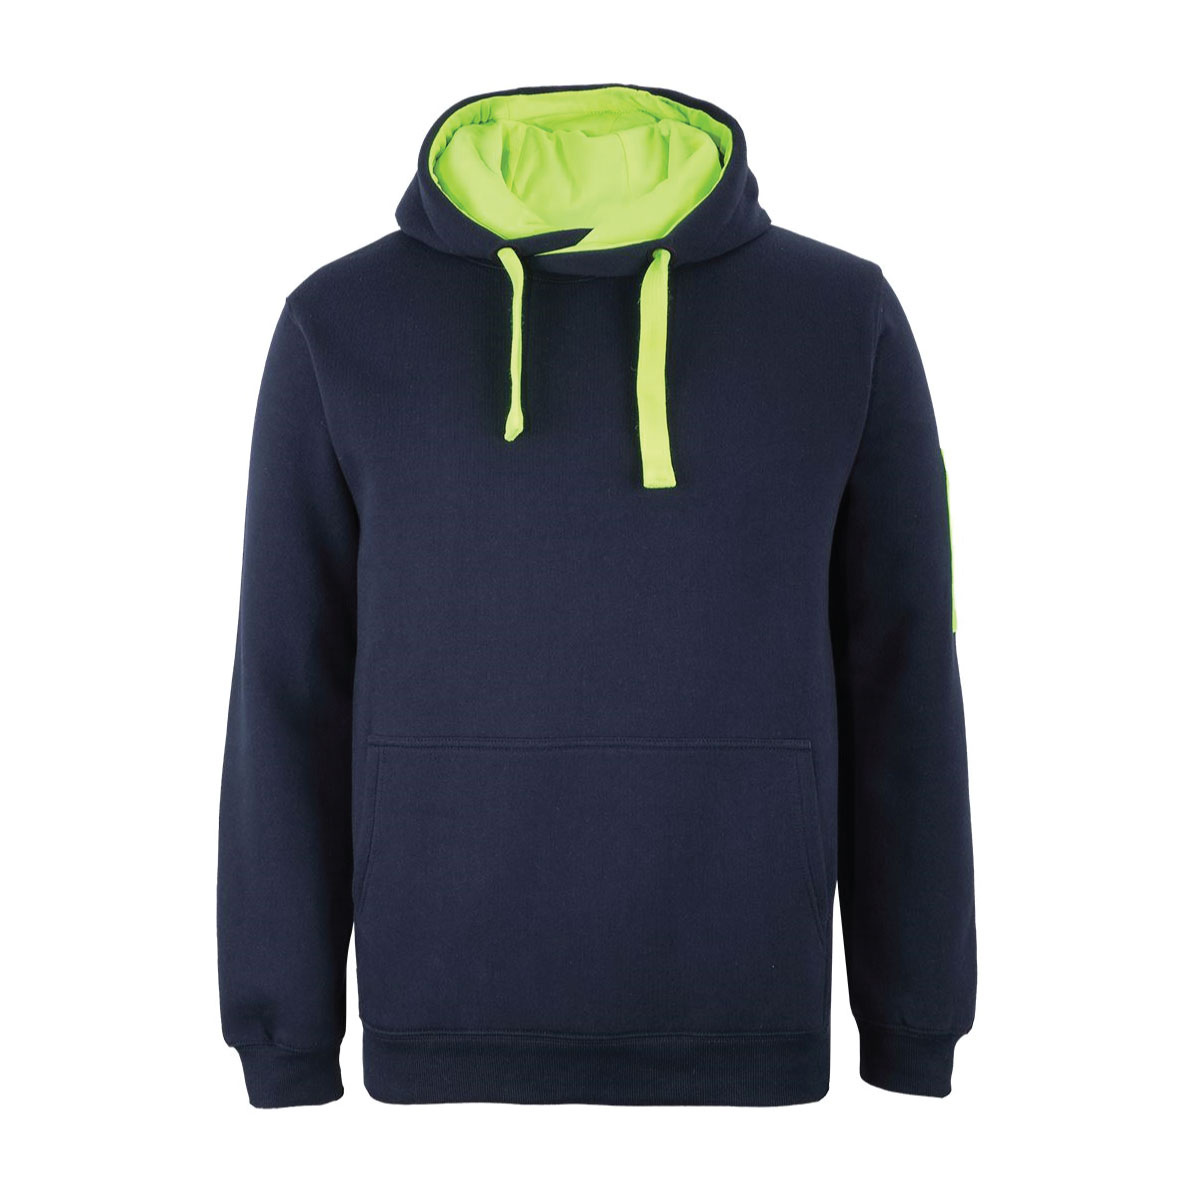 Promotional Trade Hoodies | Promotion Products